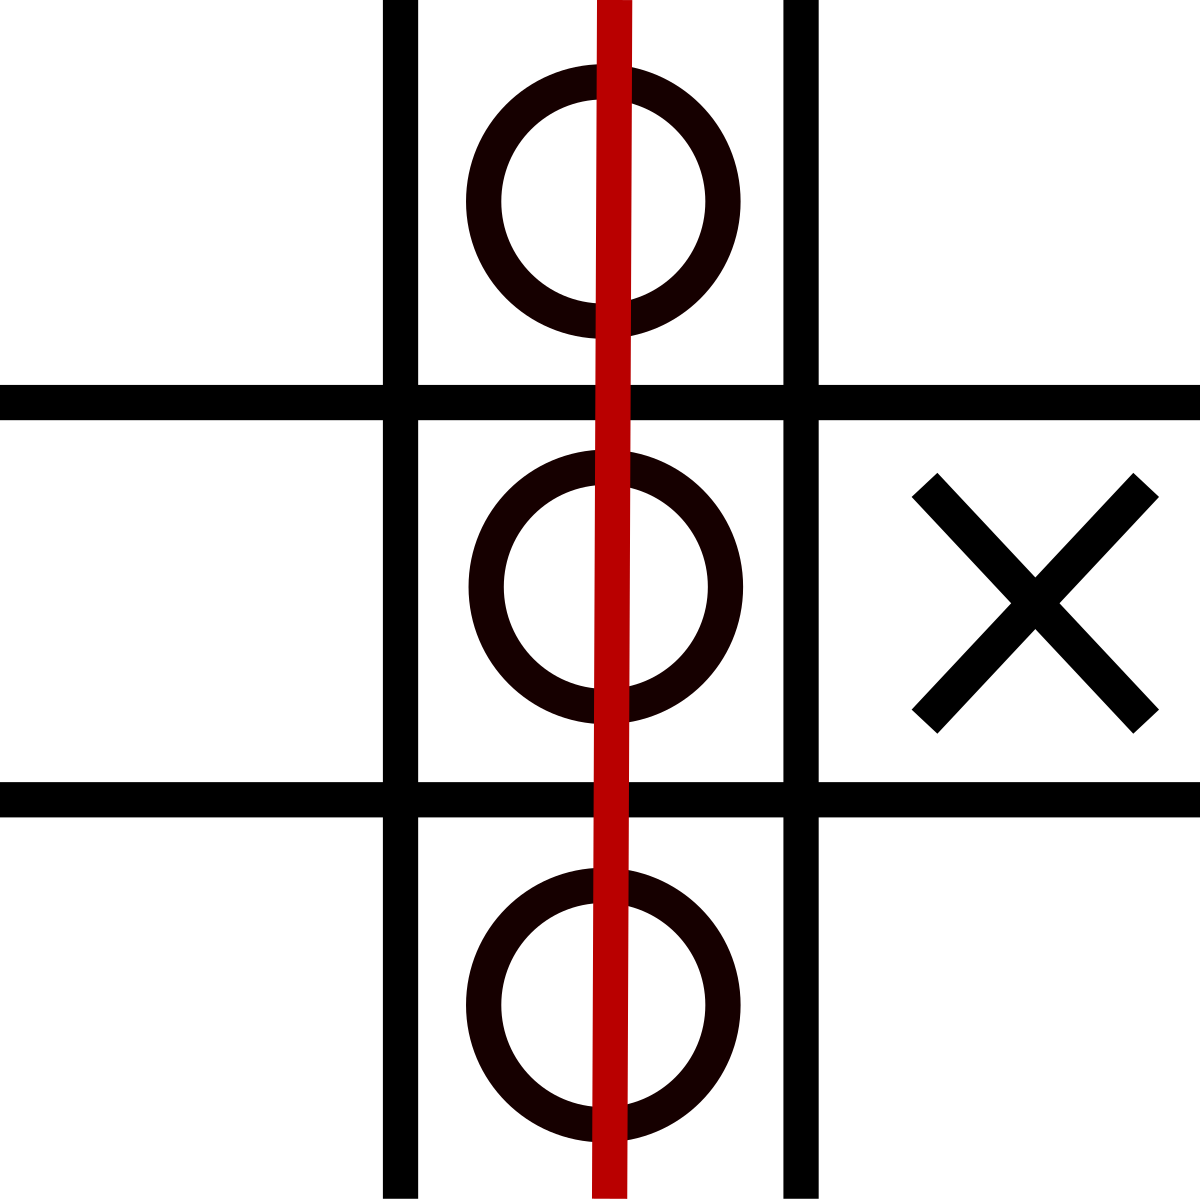 A Red Line With Circles On A Black Background